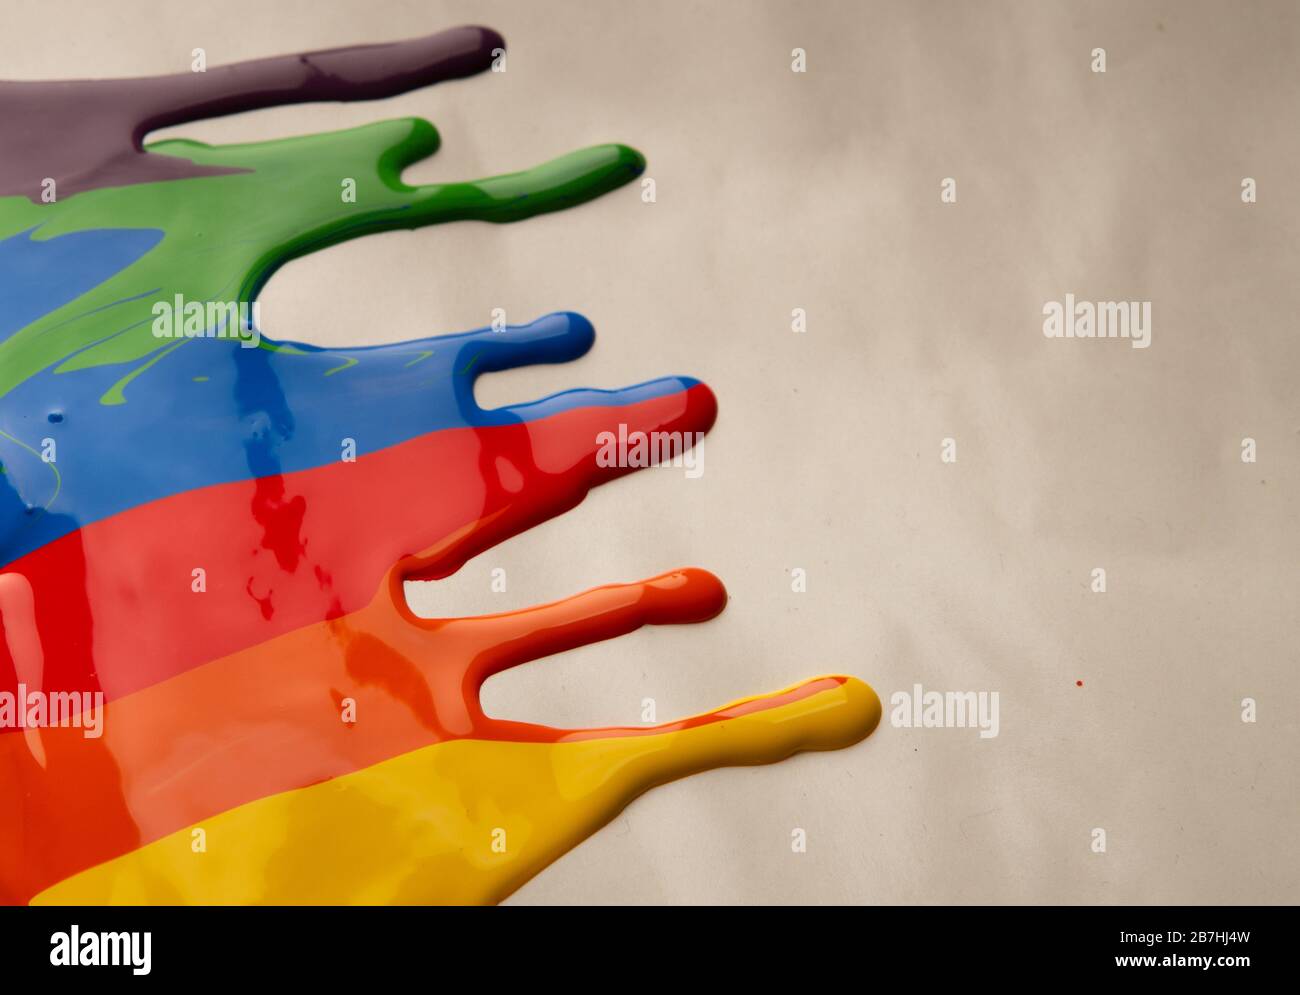 Colored paint stains dripping on gray background Stock Photo